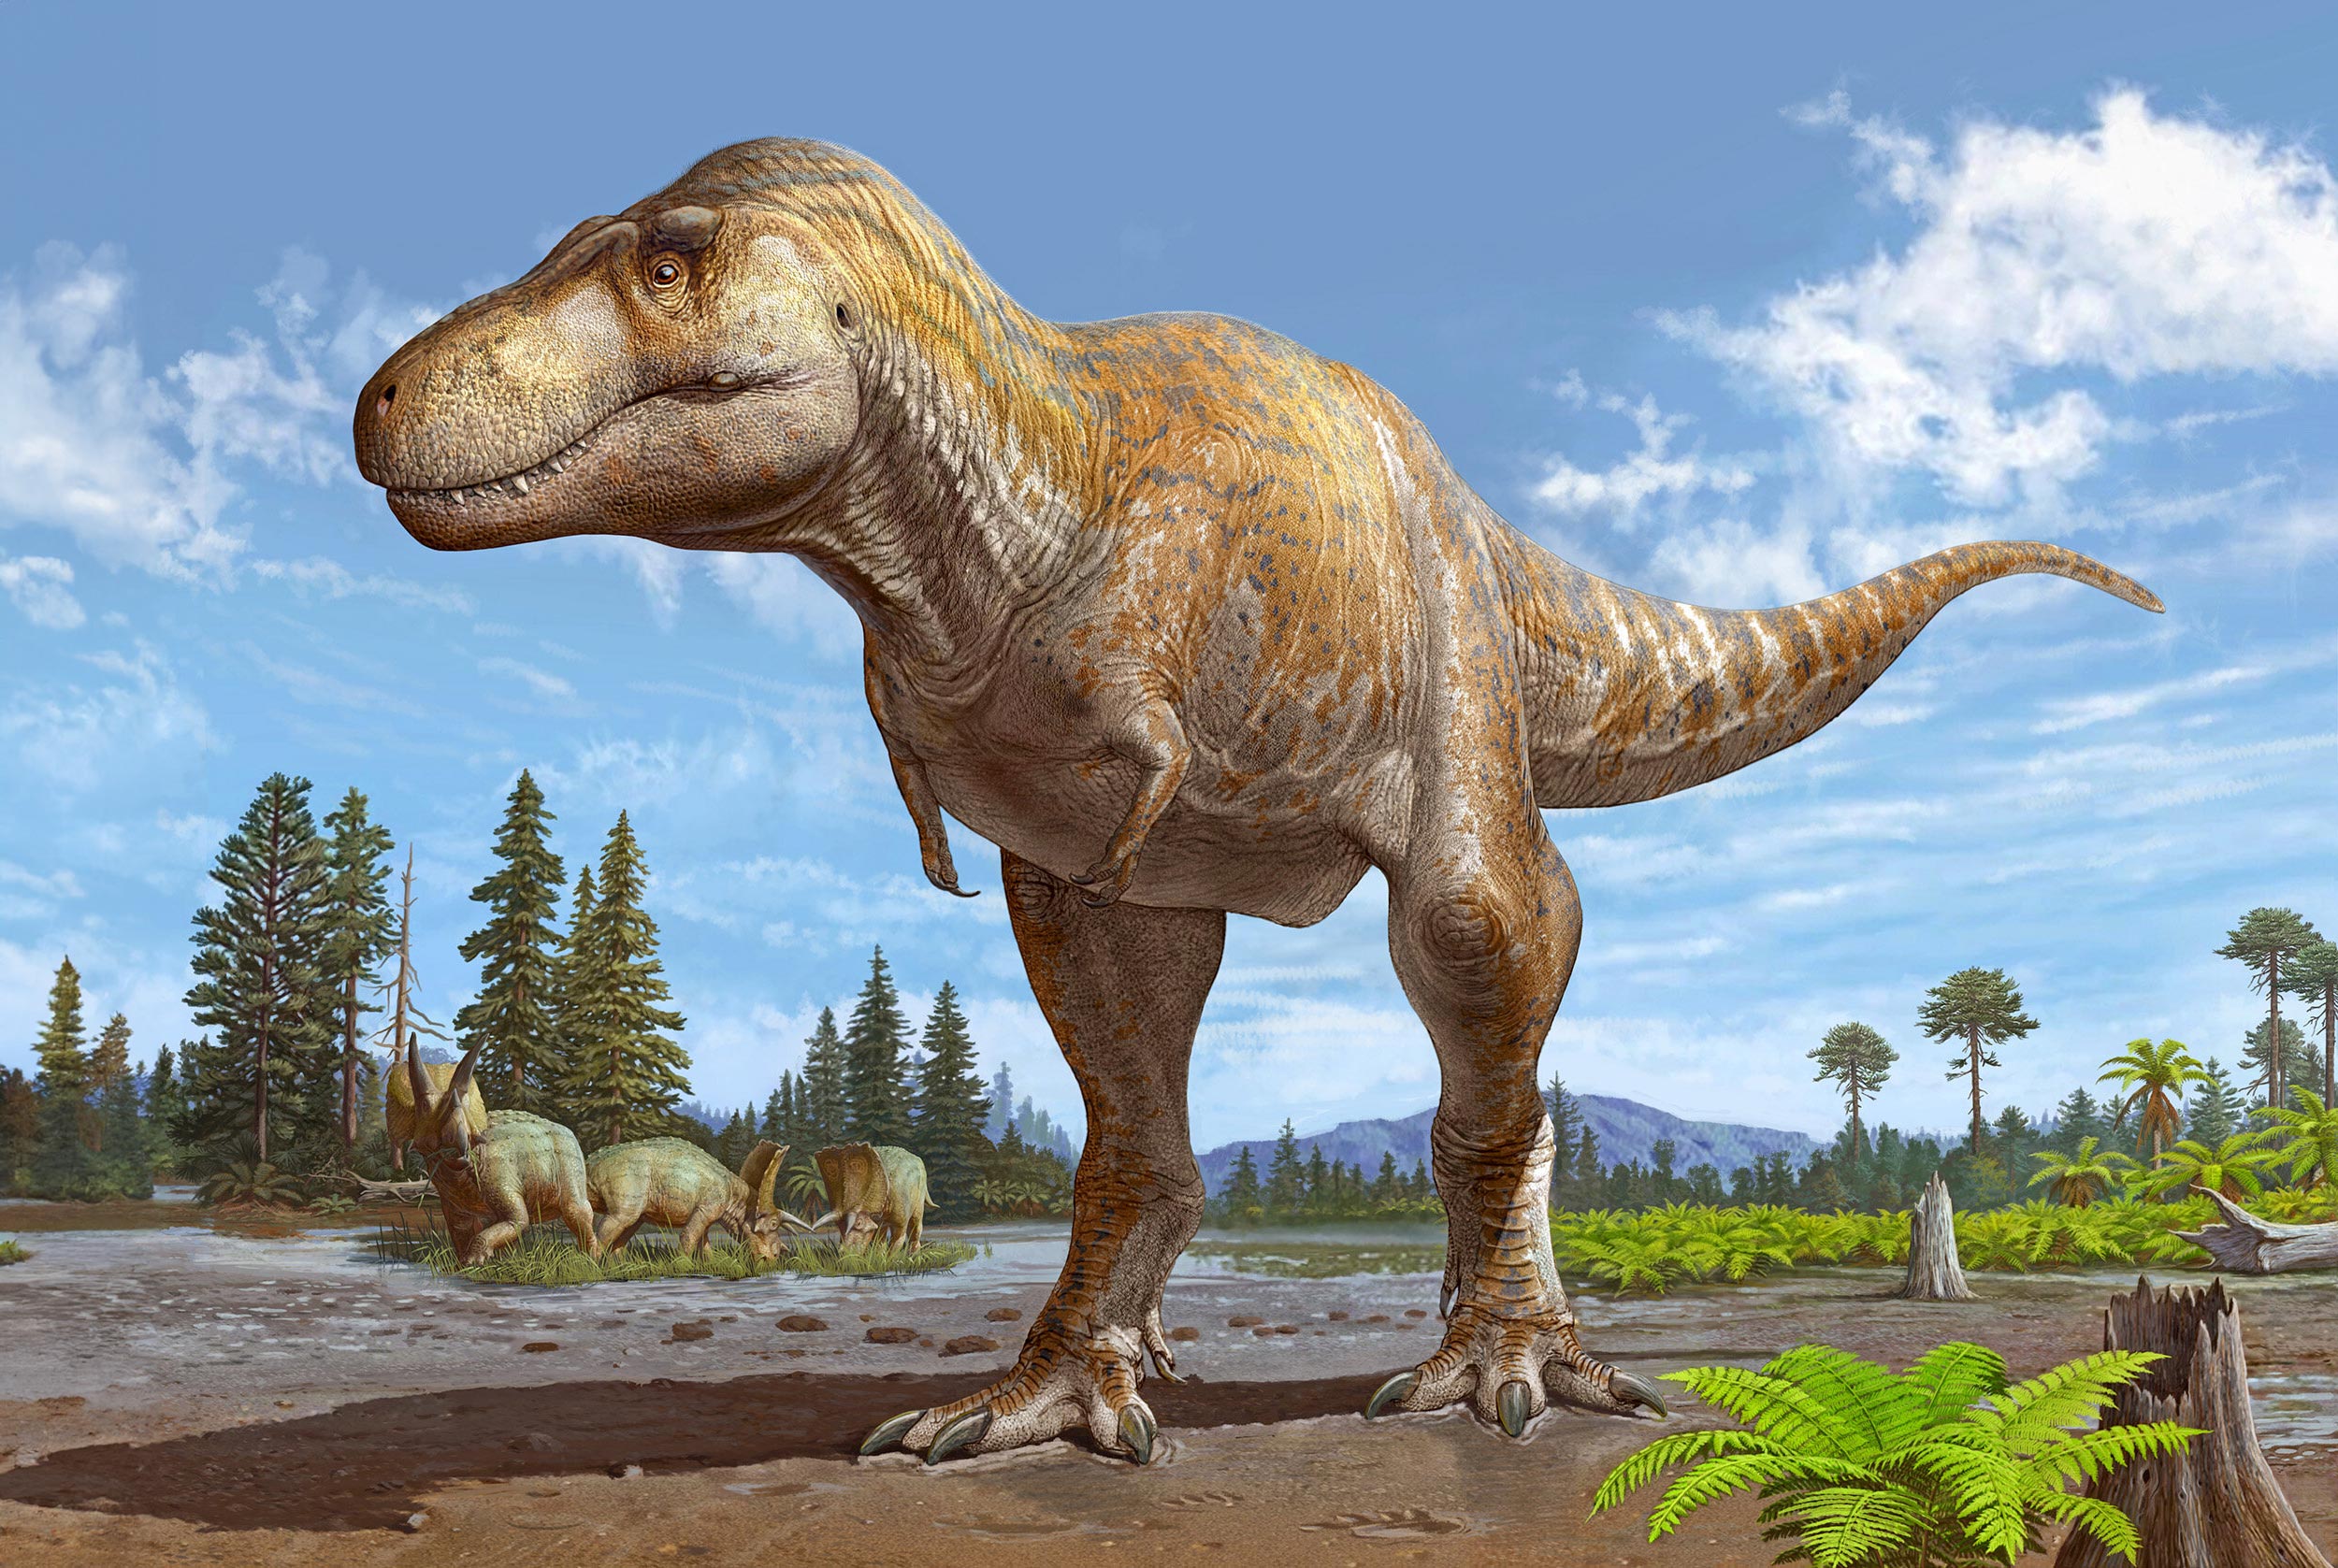 A new fossil discovery highlights the closest known relative of the dinosaur Tyrannosaurus rex